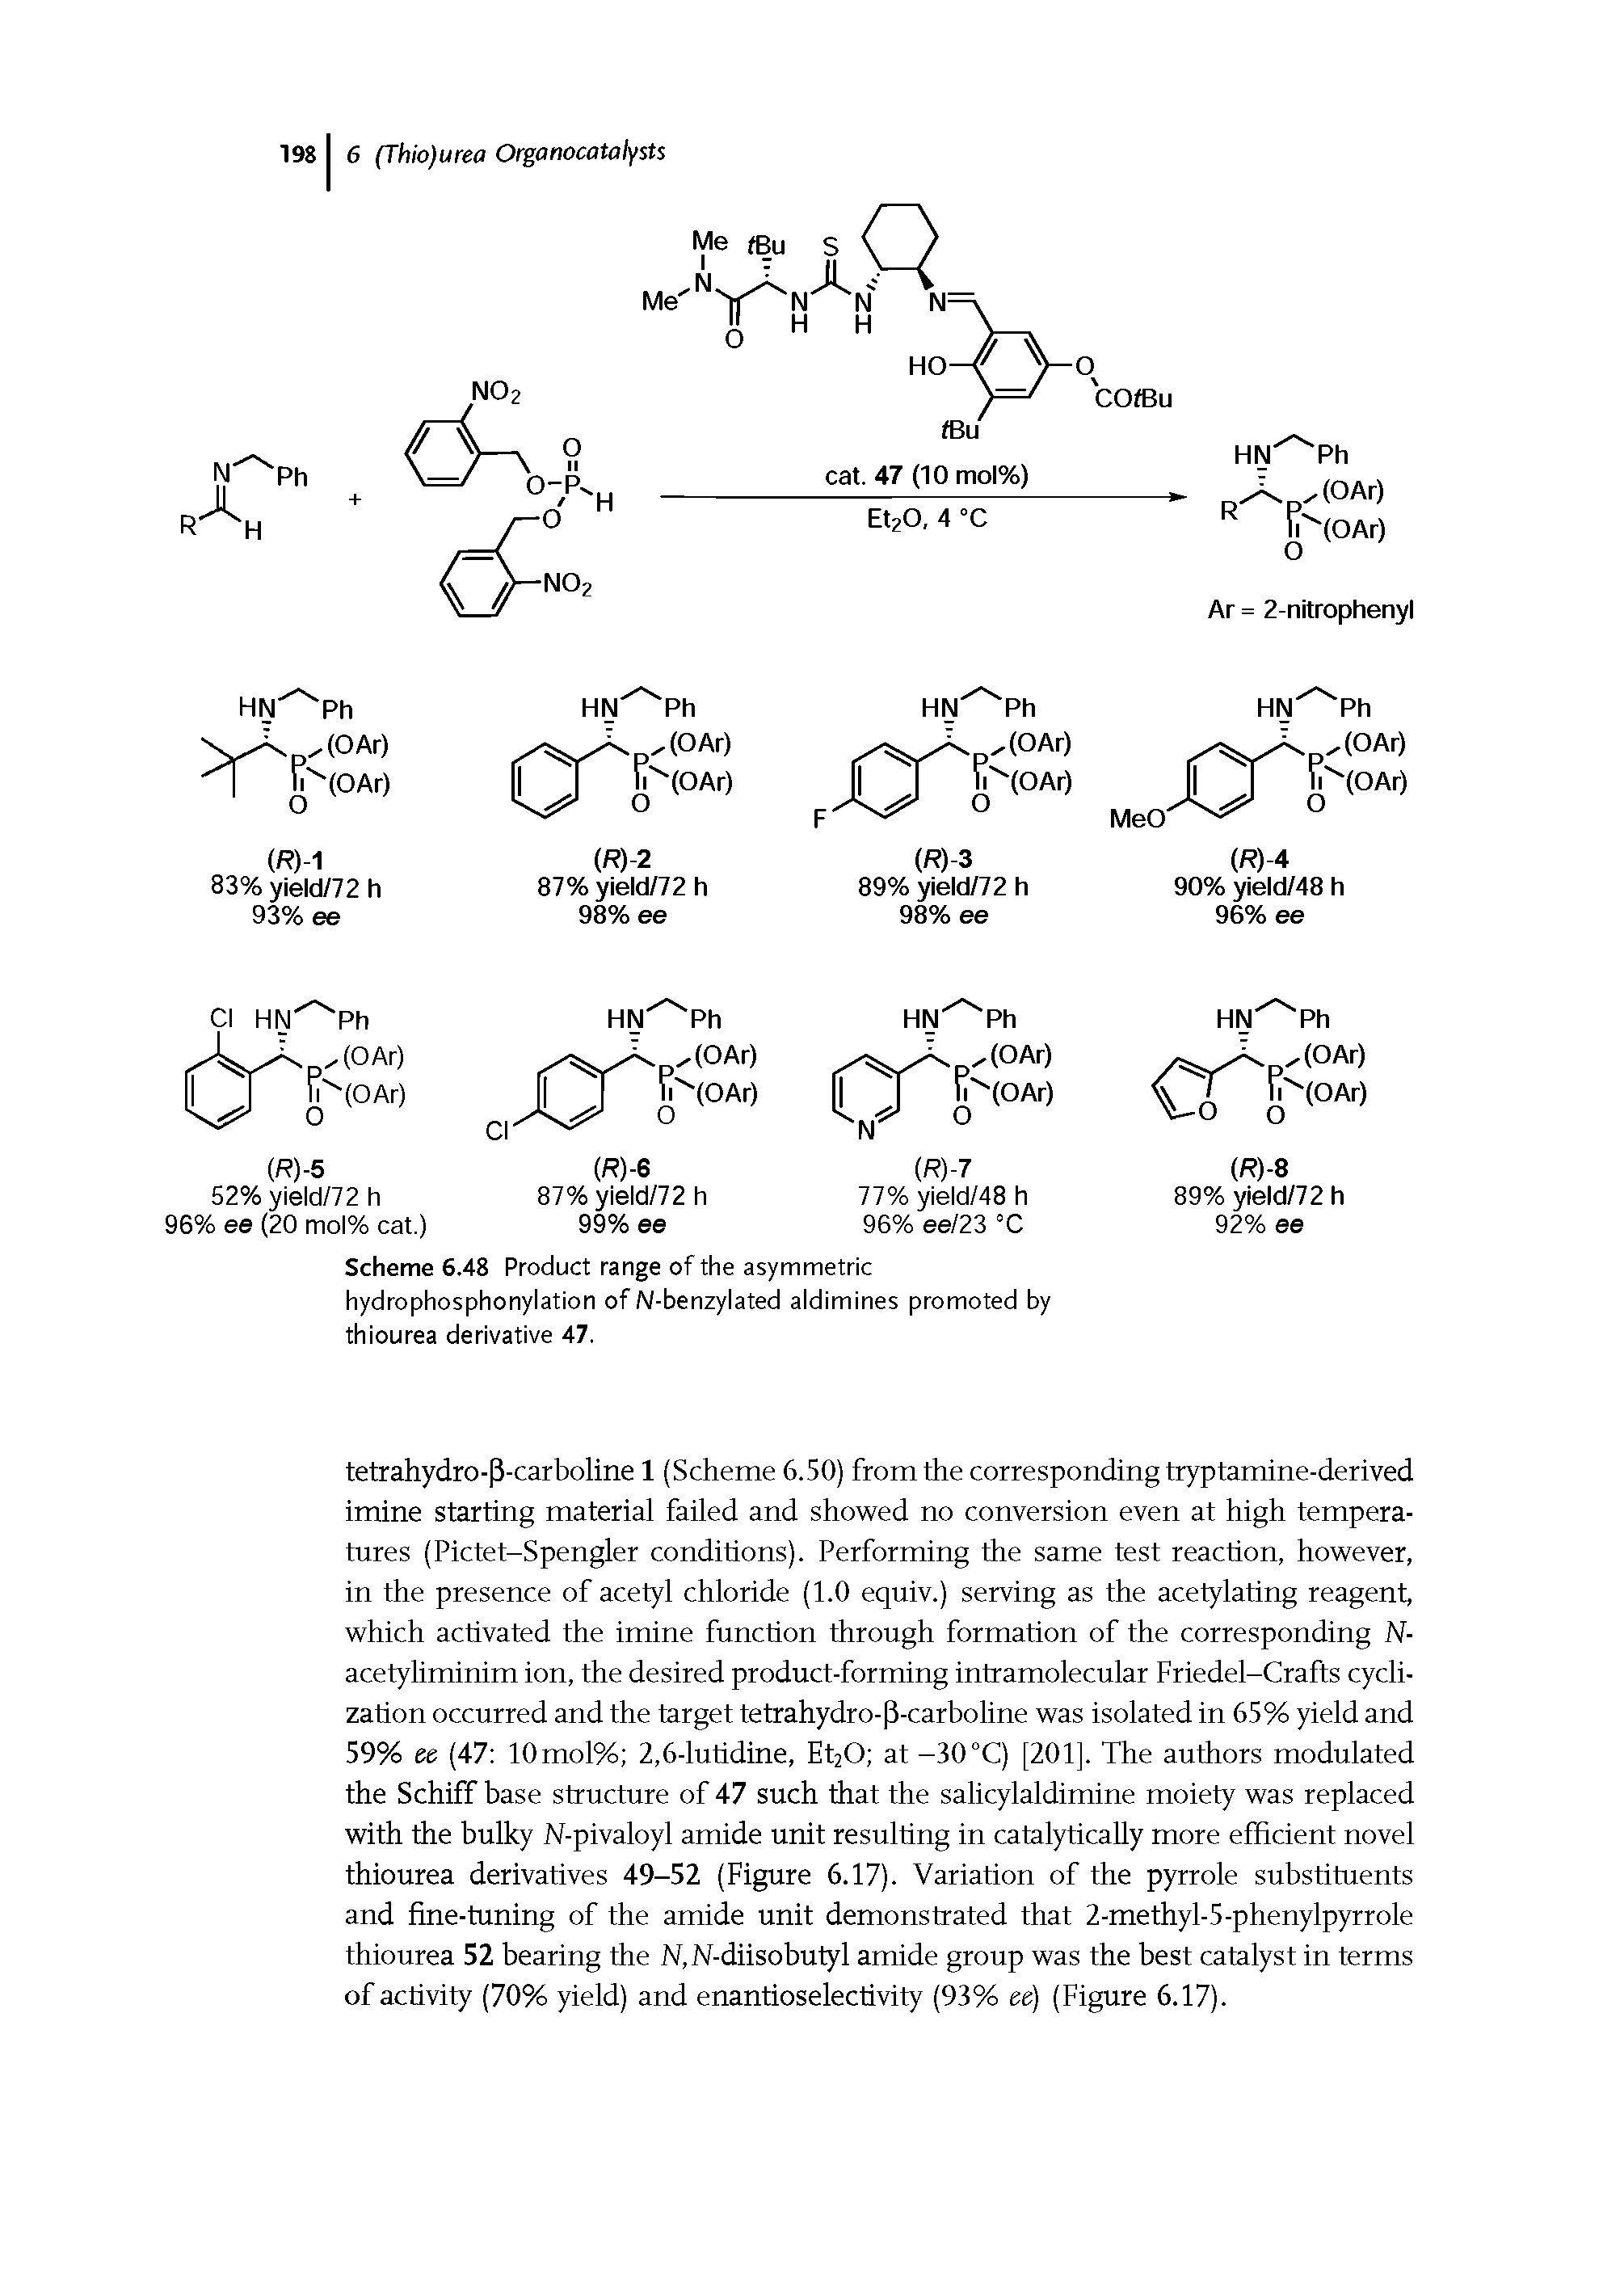 Scheme 6.48 Product range of the asymmetric hydrophosphonylation of N-benzylated aldimines promoted by thiourea derivative 47.